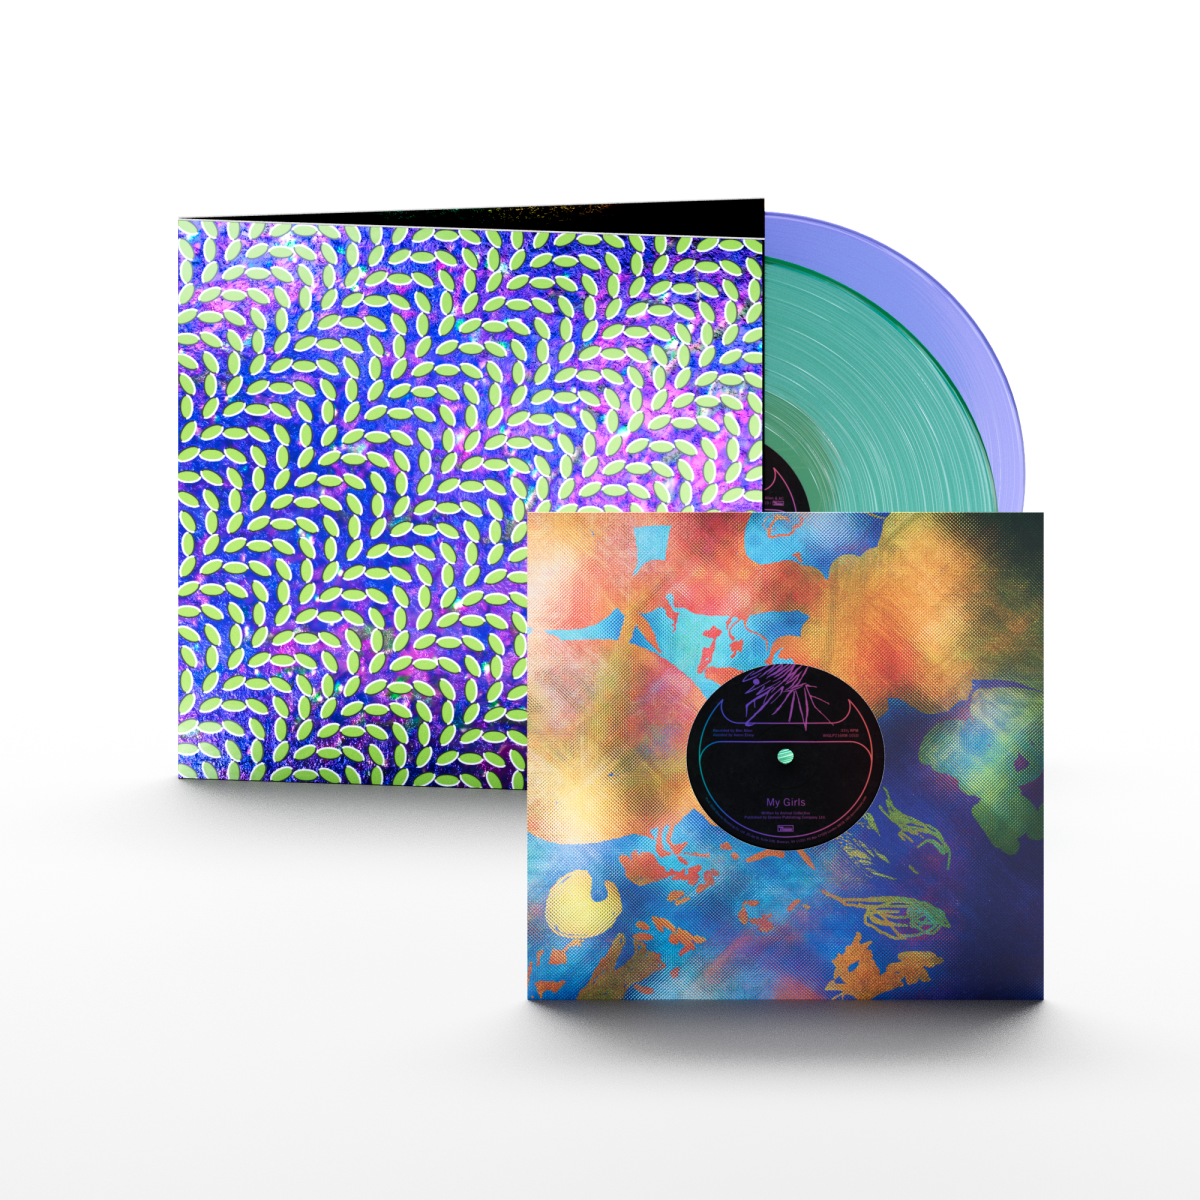 animal_collective_merriweather_post_pavillion_15th_anniversary_reissue.png